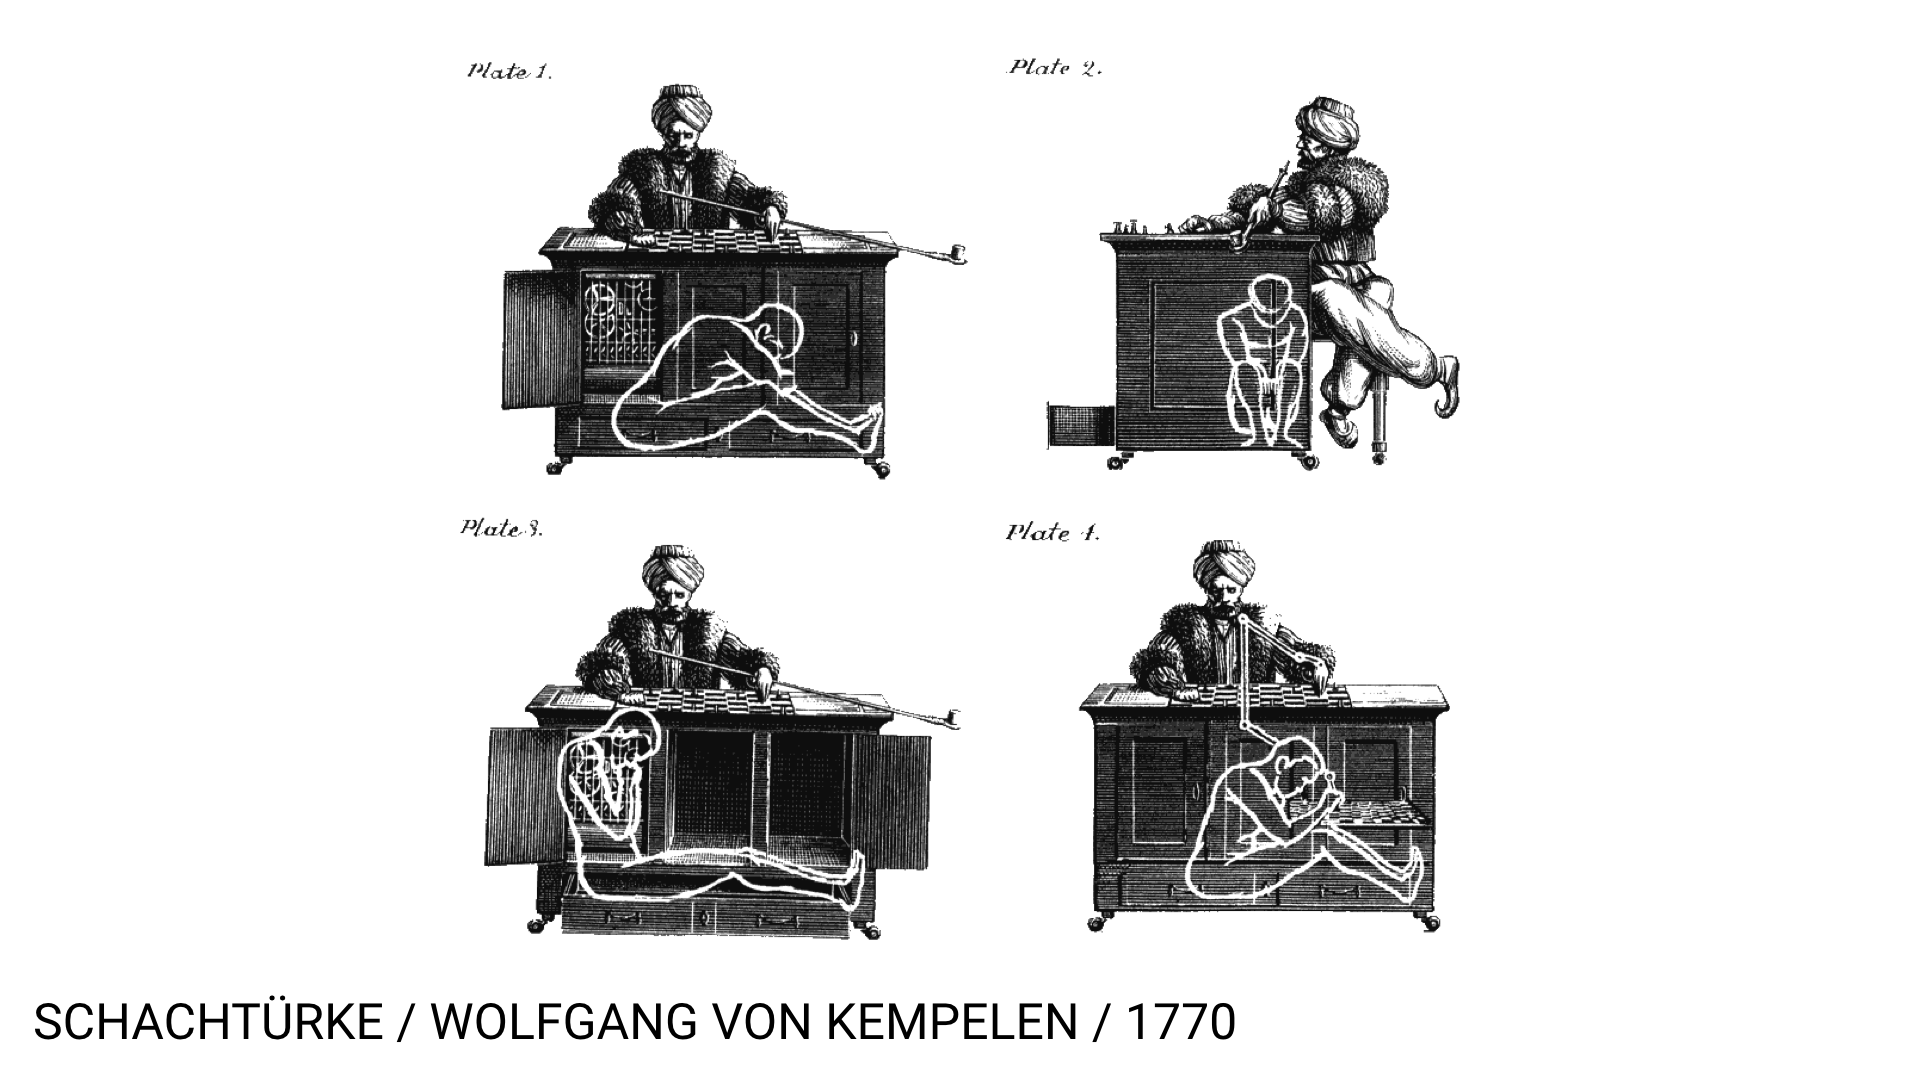 A series of illustrations demonstrating how a person in the bottom part of the Mechanical Turk cabinet could position himself to keep his presence hidden.